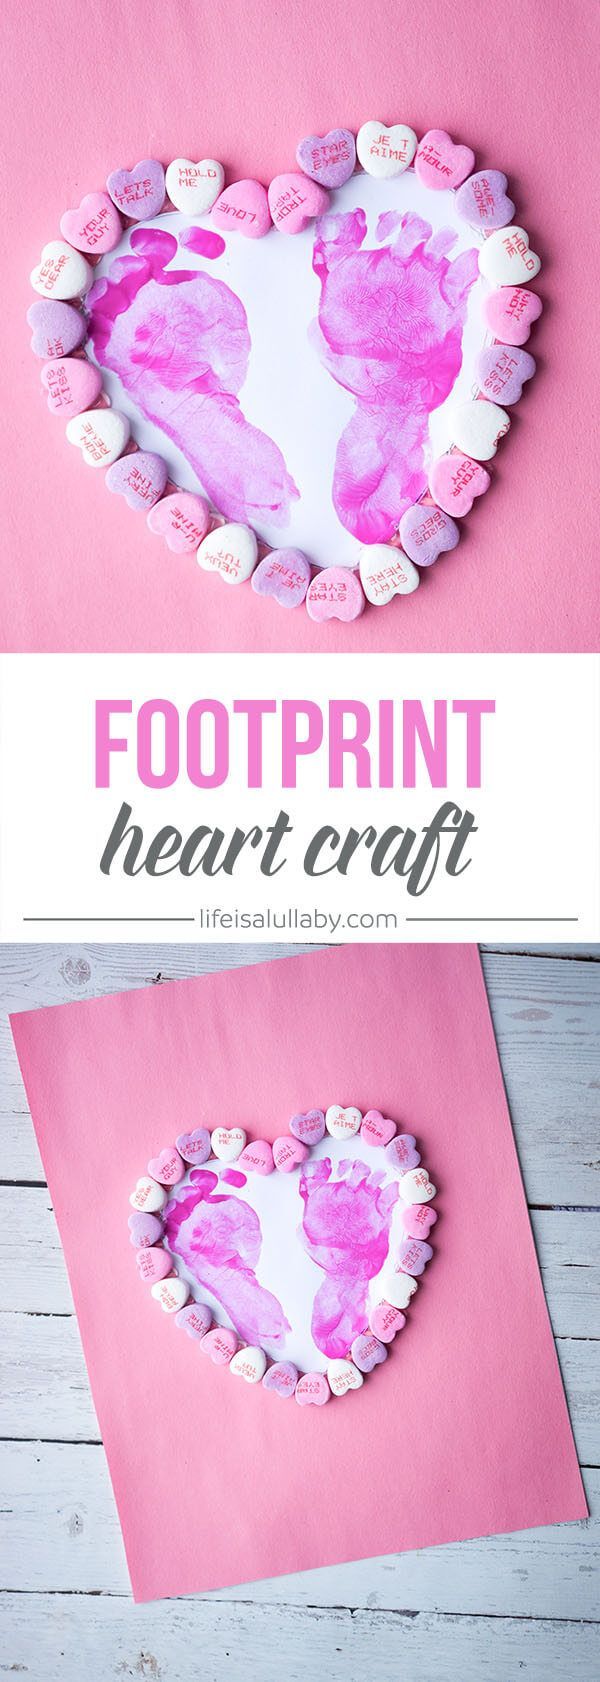 This footprint heart craft is SO CUTE! This is such a nice idea for Valentines Day or Mothers day as a gift or can be framed.